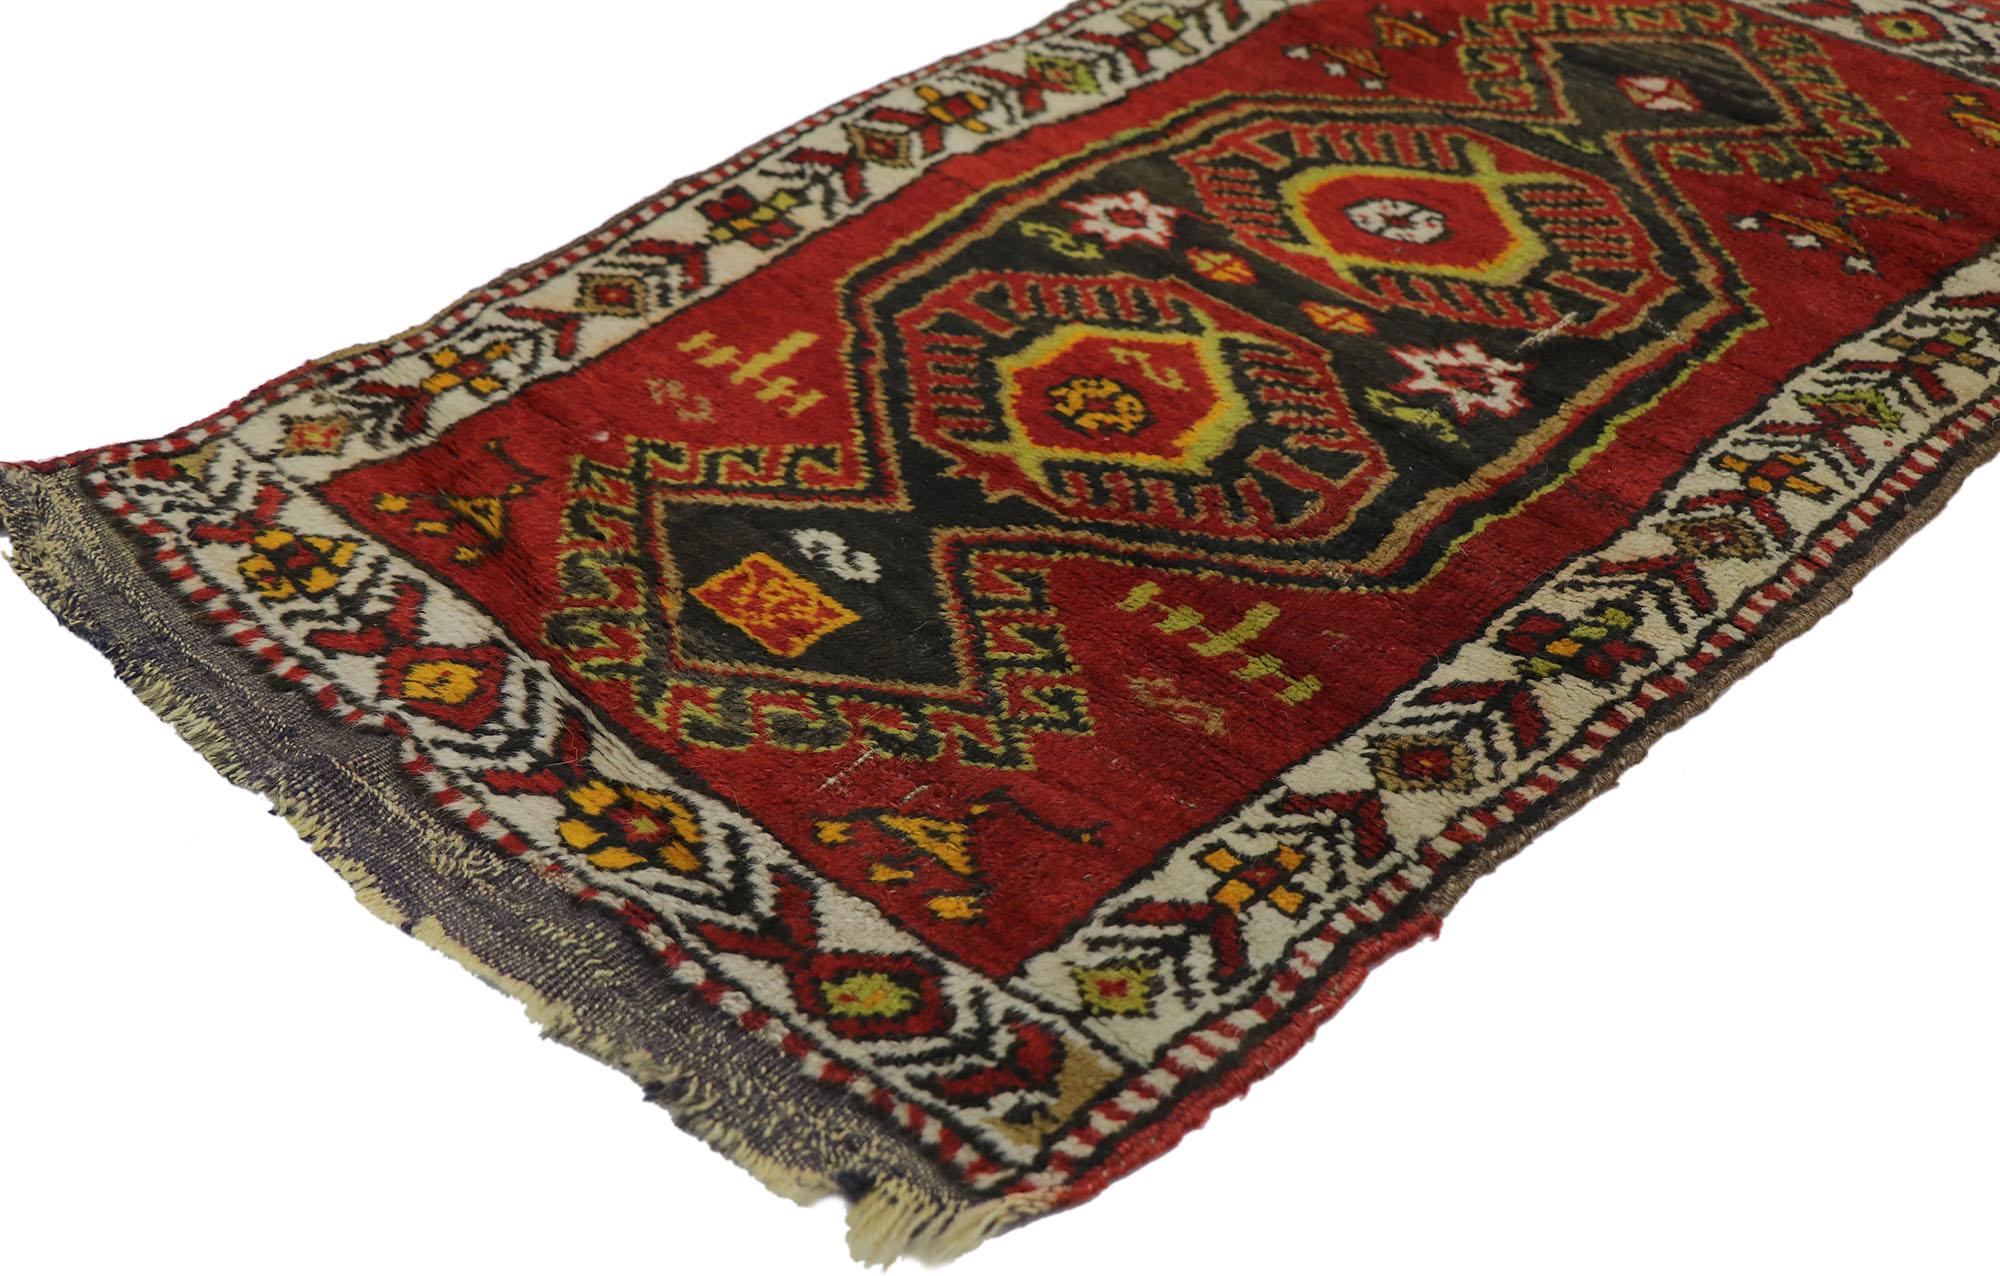 ?21694 antique Turkish Oushak rug with Tribal style 01'09 x 02'10. ??With its beguiling beauty and tribal style, this hand-knotted wool antique Turkish Oushak rug is immersed in Anatolian history. The abrashed red field features a hexagonal